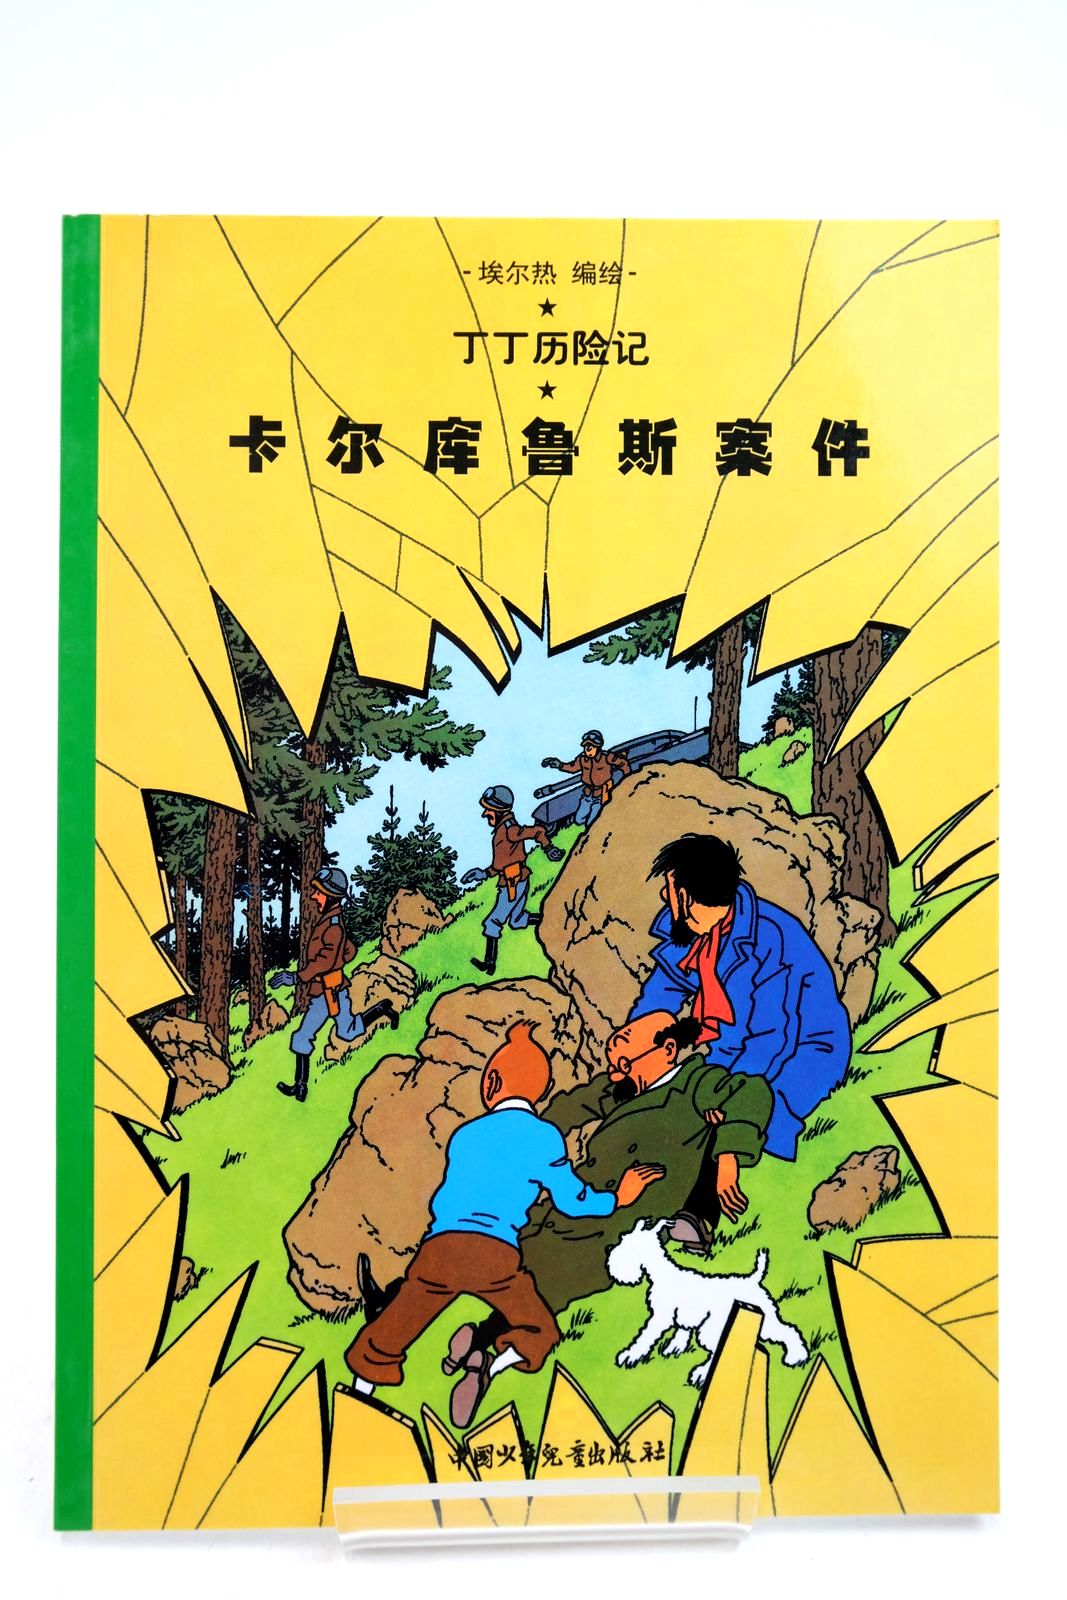 Photo of THE ADVENTURES OF TINTIN: THE CALCULUS AFFAIR (CHINESE LANGUAGE EDITION) written by Herge, illustrated by Herge, published by China Press (STOCK CODE: 2140349)  for sale by Stella & Rose's Books